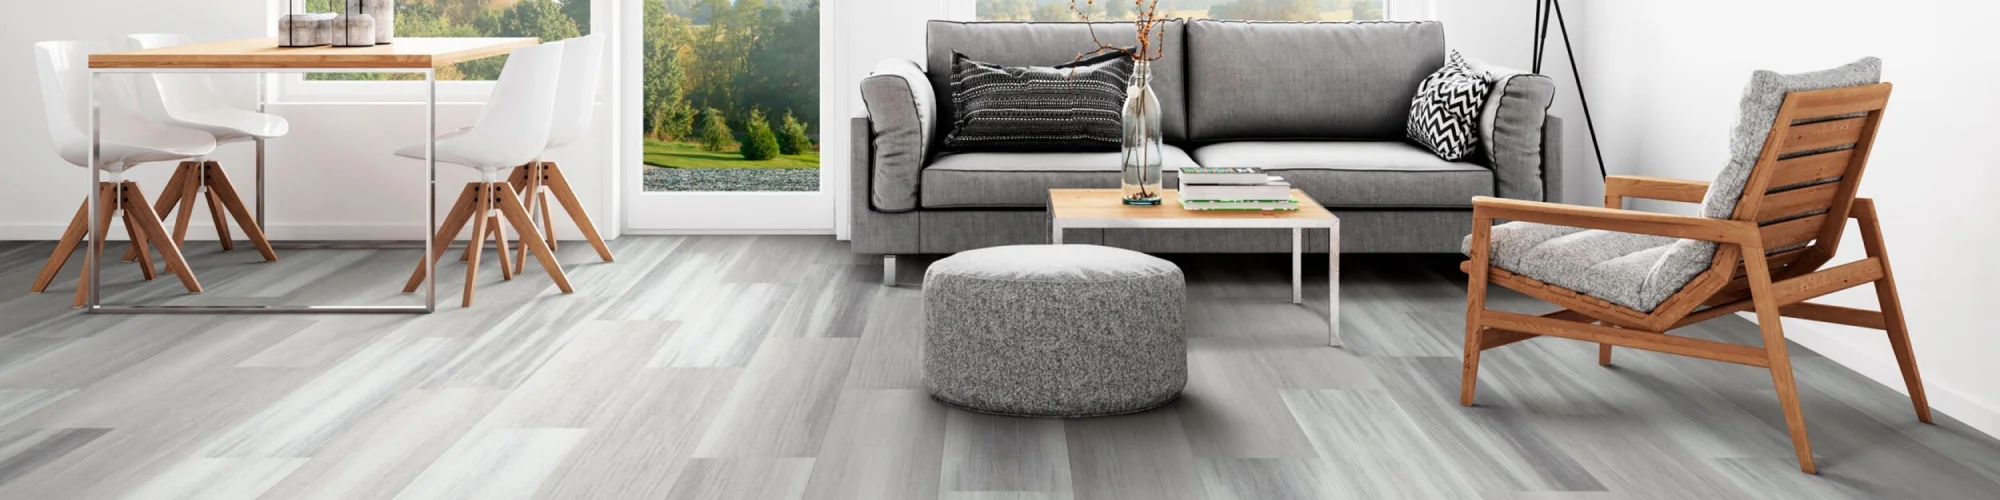 Black Label Collection flooring from Happy Feet installed in bright and modern living room